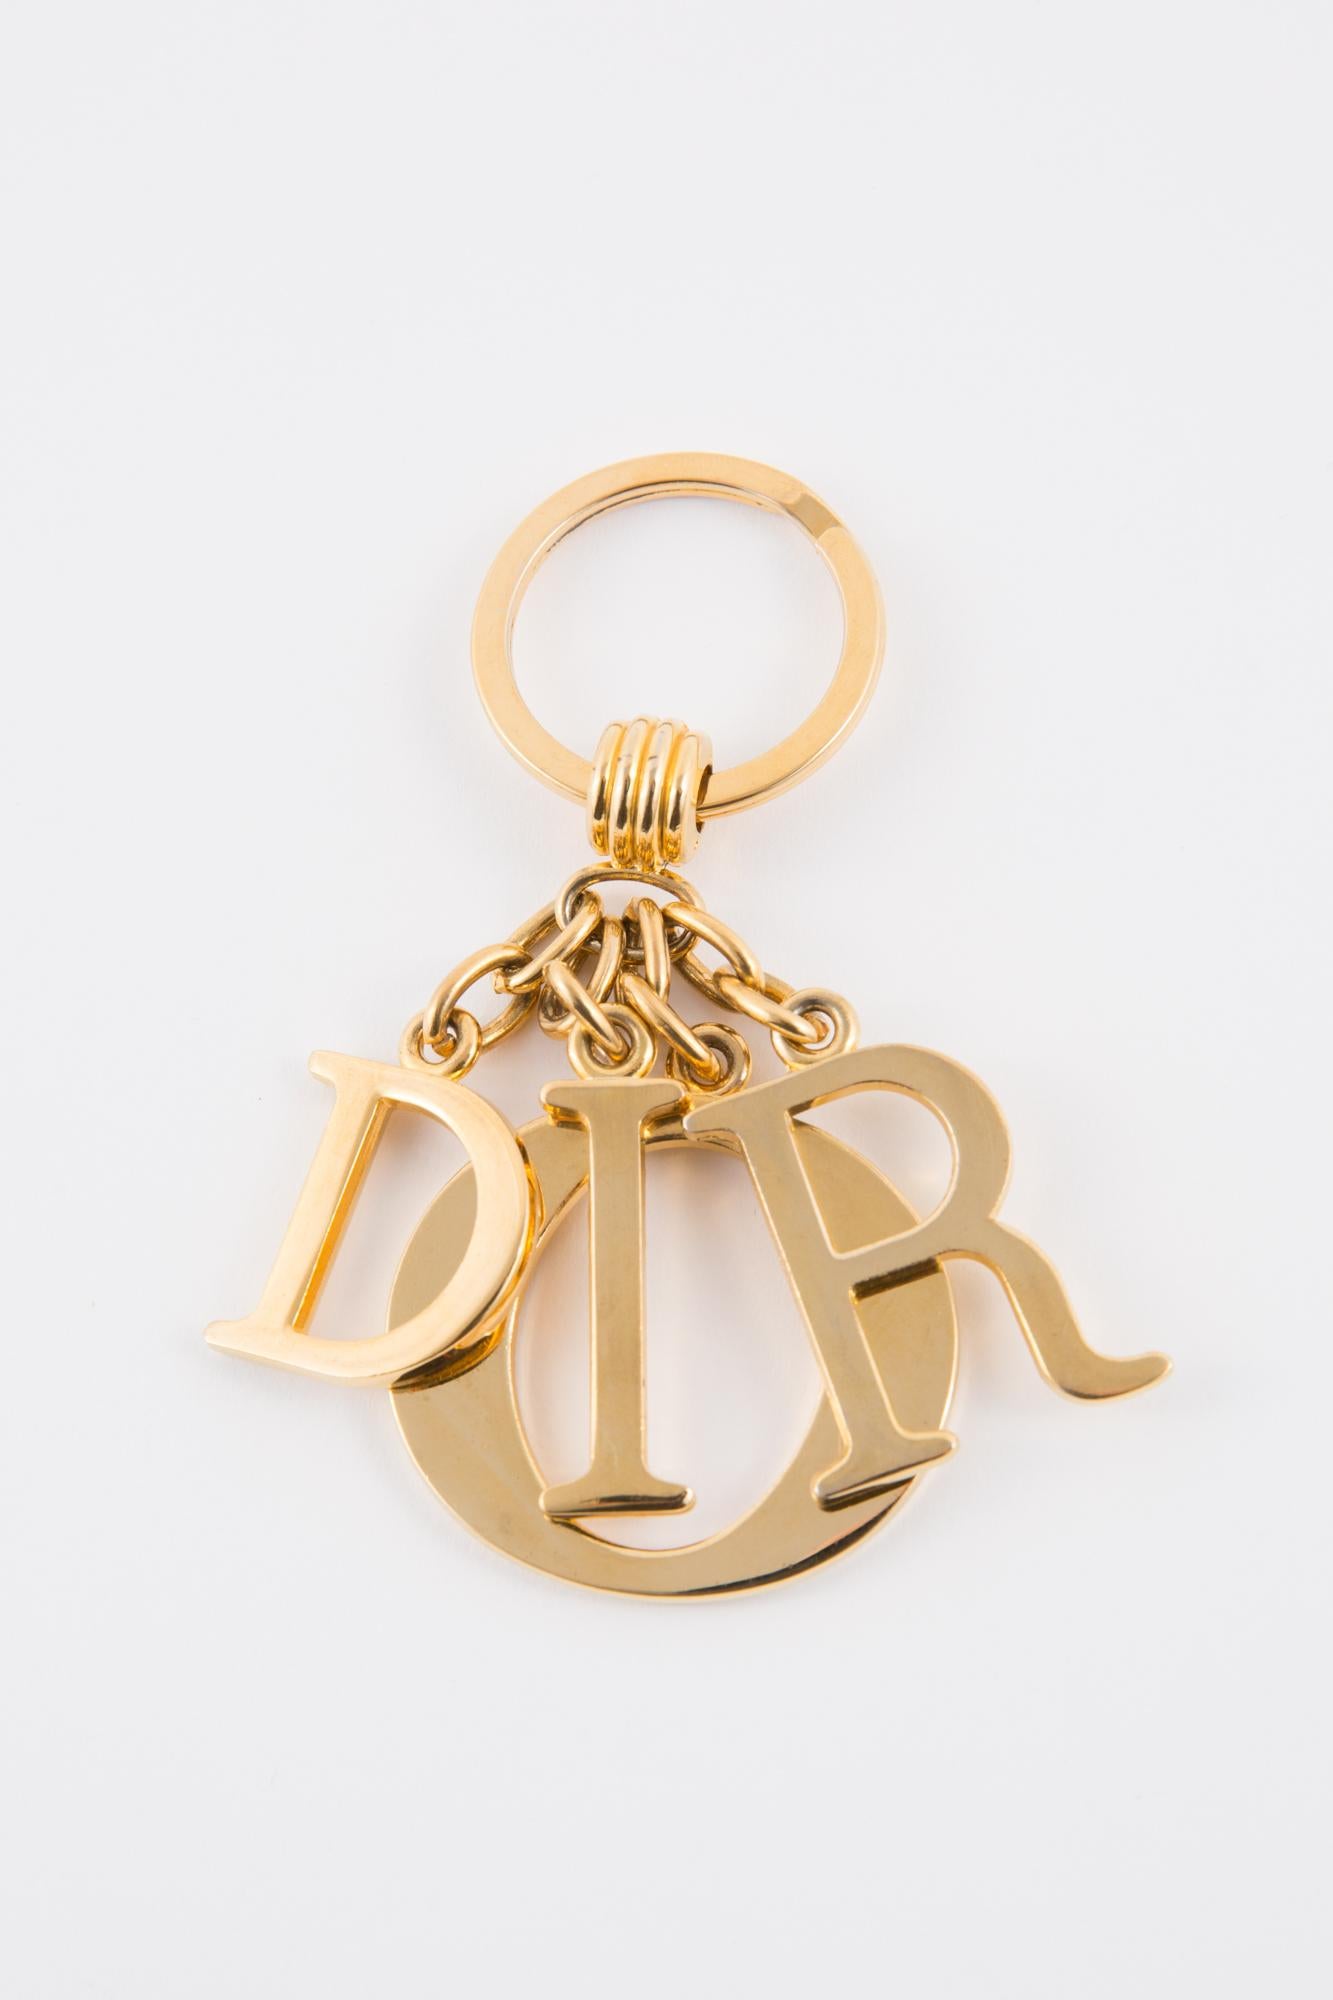 Christian Dior key ring or bag accessory featuring gold tone free letters. Delivered in original box.
In good vintage condition  Made in France. 
Maxi Length: 3.9in (10cm)
Ring Diameter:1.18in. (3cm) 
We guarantee you will receive this gorgeous item